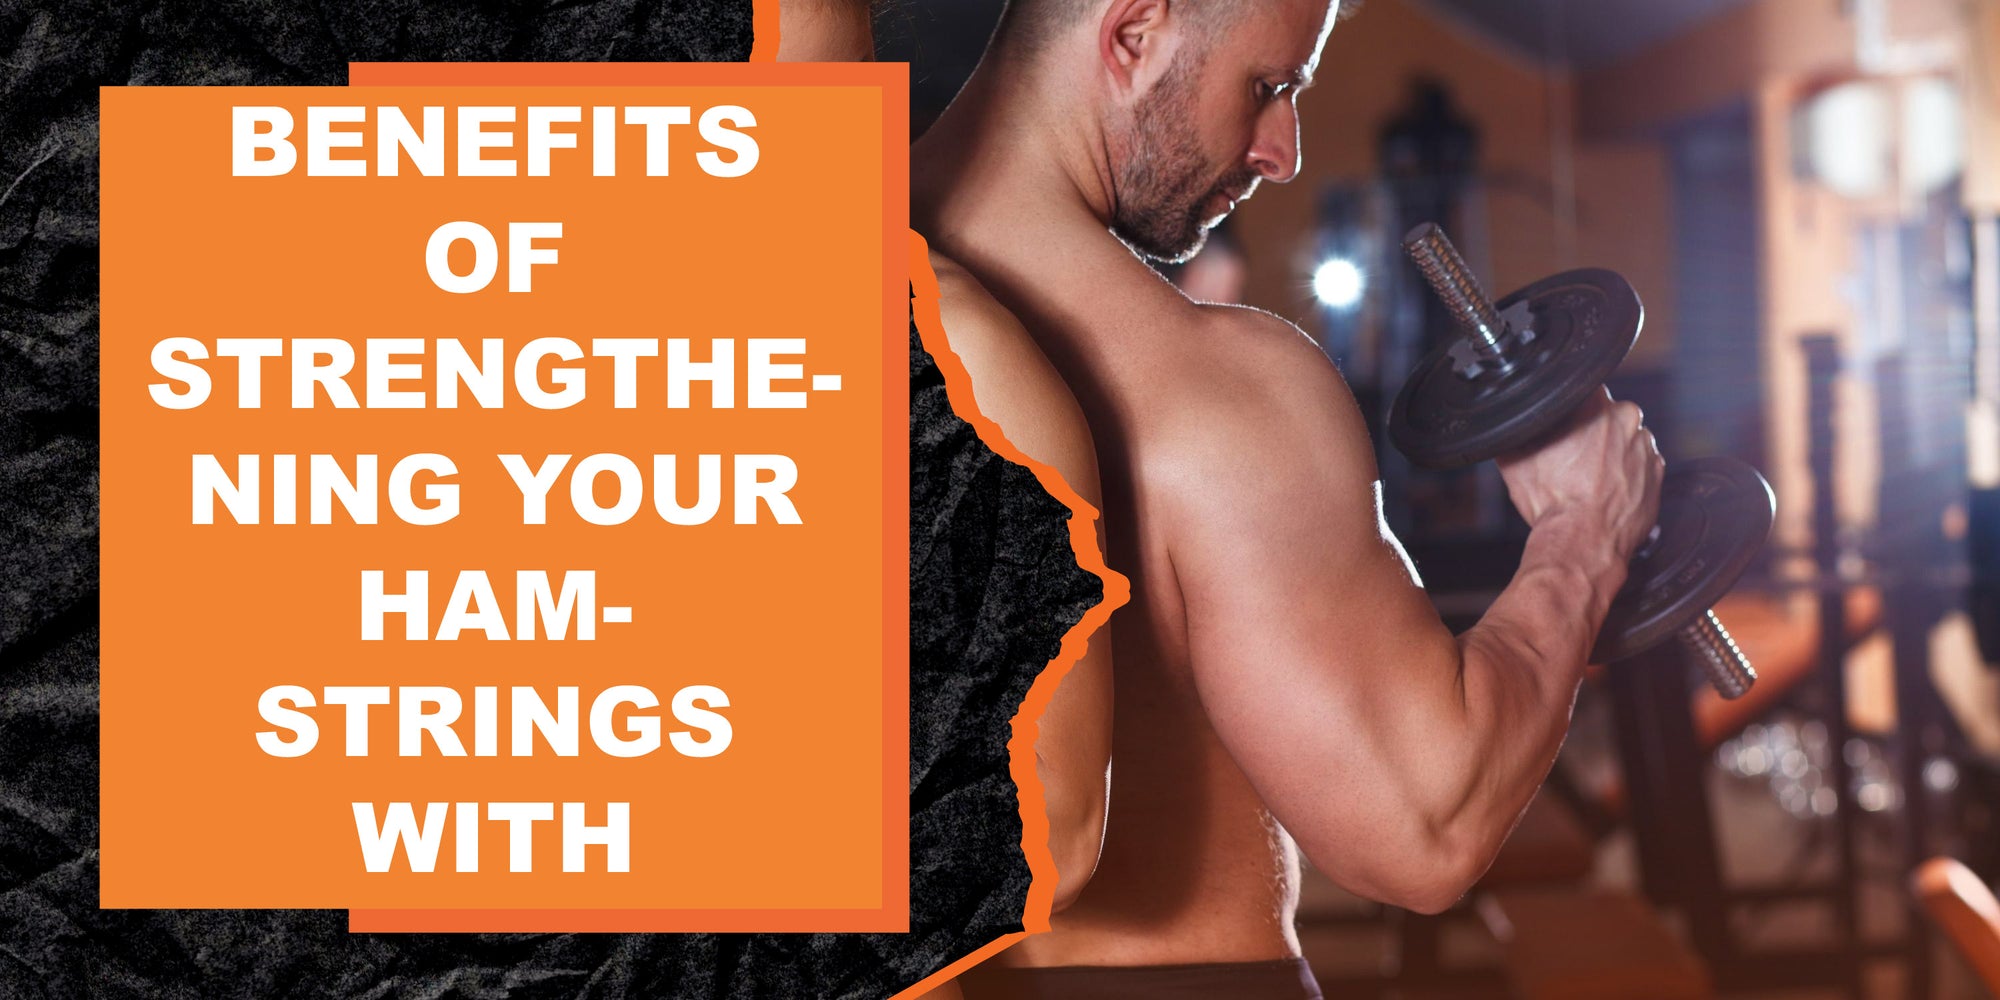 The Benefits of Strengthening Your Hamstrings with Exercise